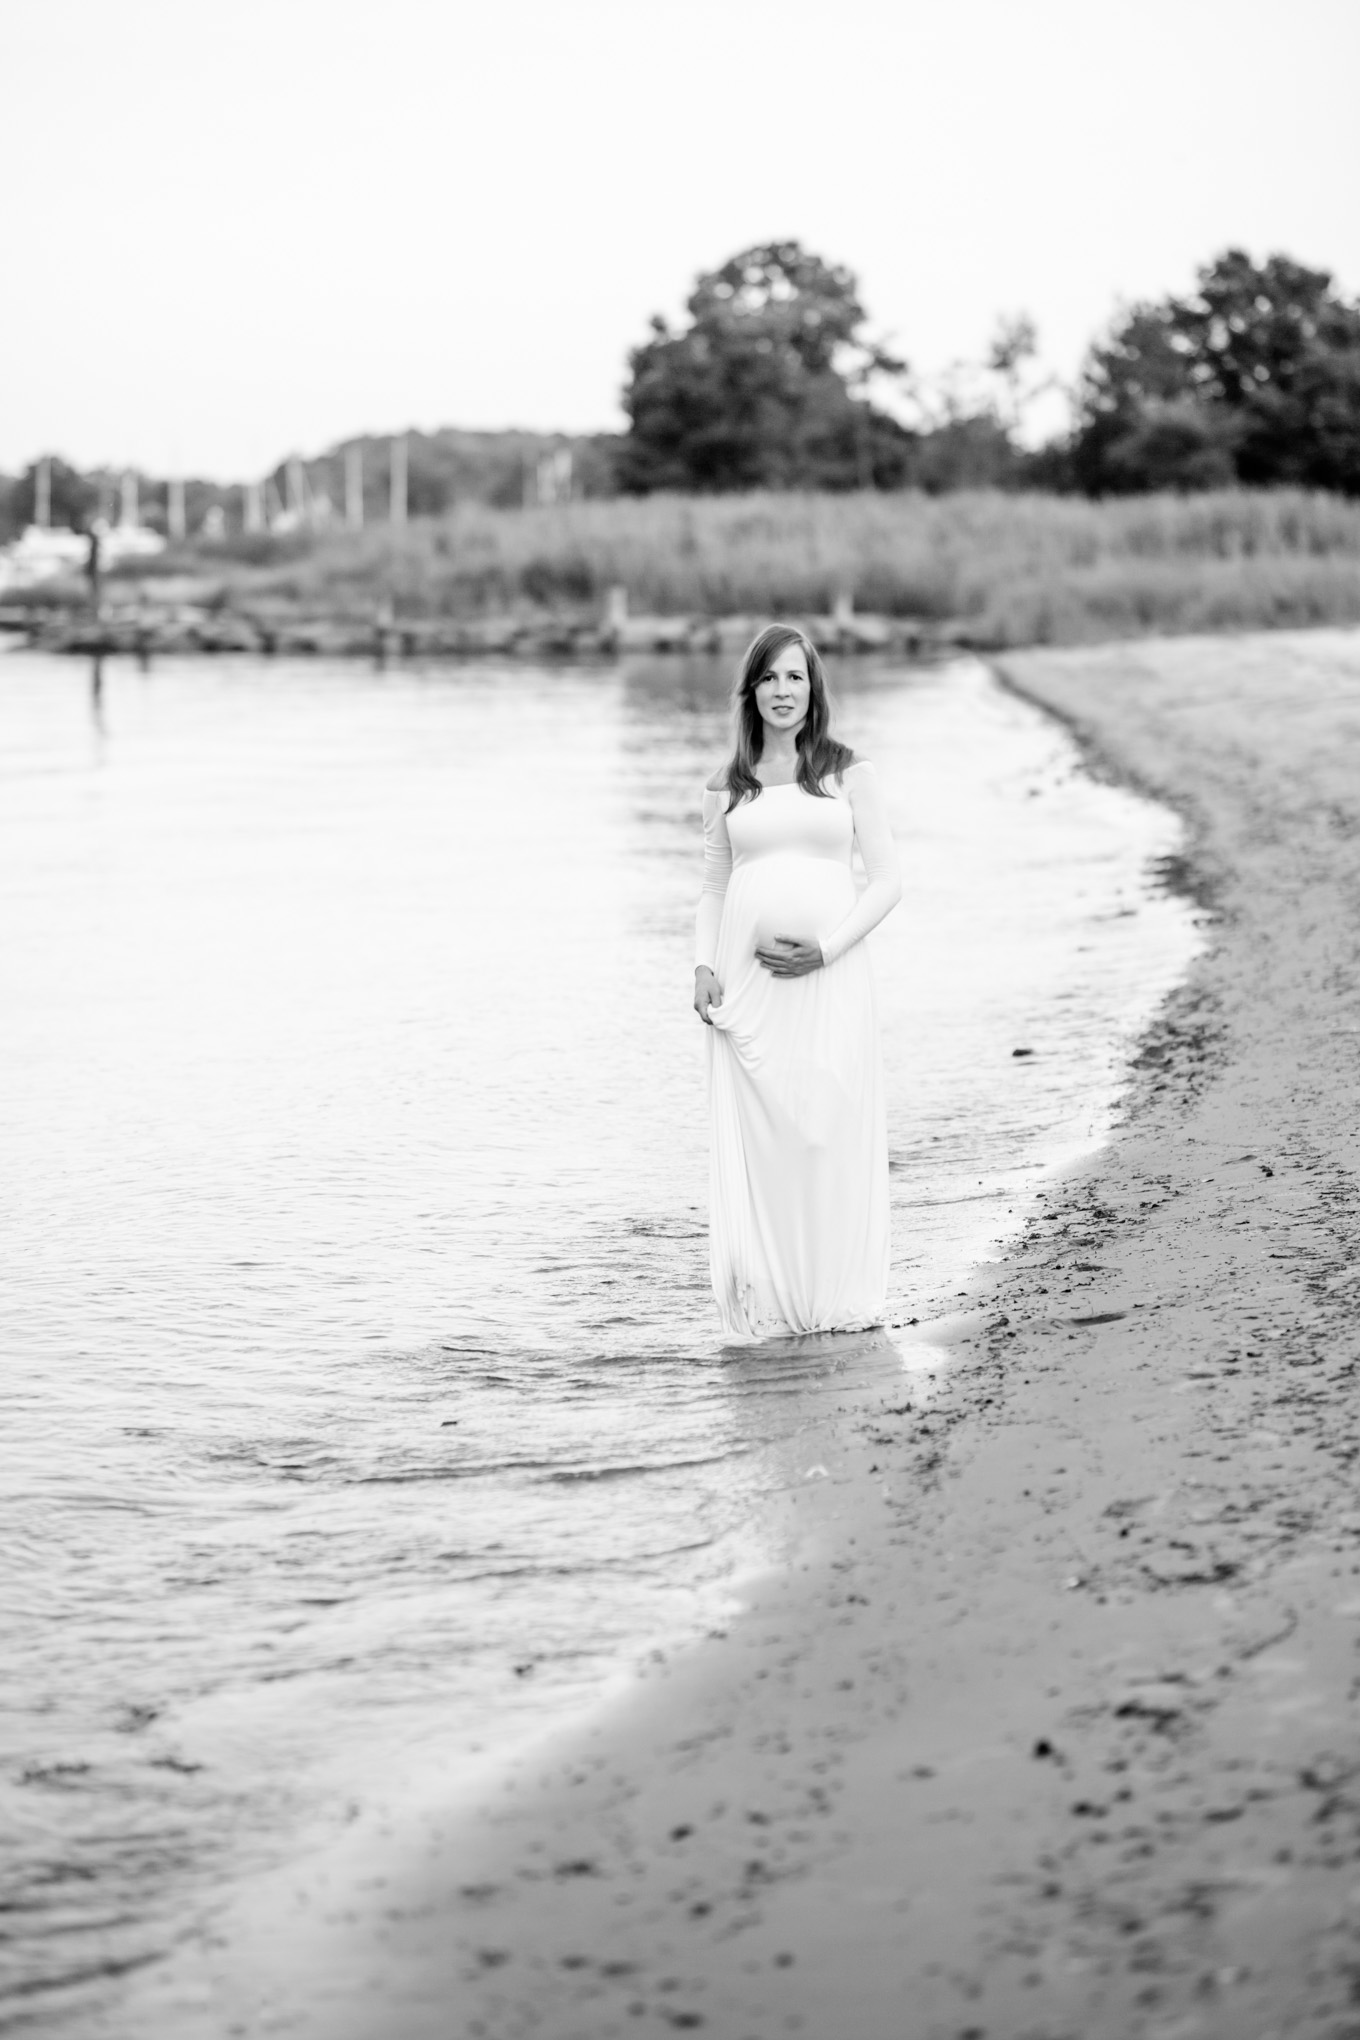 Annapolis waterfront maternity photos, Annapolis maternity photos, Annapolis maternity photographer, summer waterfront portraits, waterfront portraits, sunset portraits, sunset maternity portraits, sunset maternity photos, Annapolis photographer, DC maternity portraits, DC maternity photos, DC maternity photographer, Rachel E.H. Photography, summer maternity photos, maternity photos style, woman walking in water